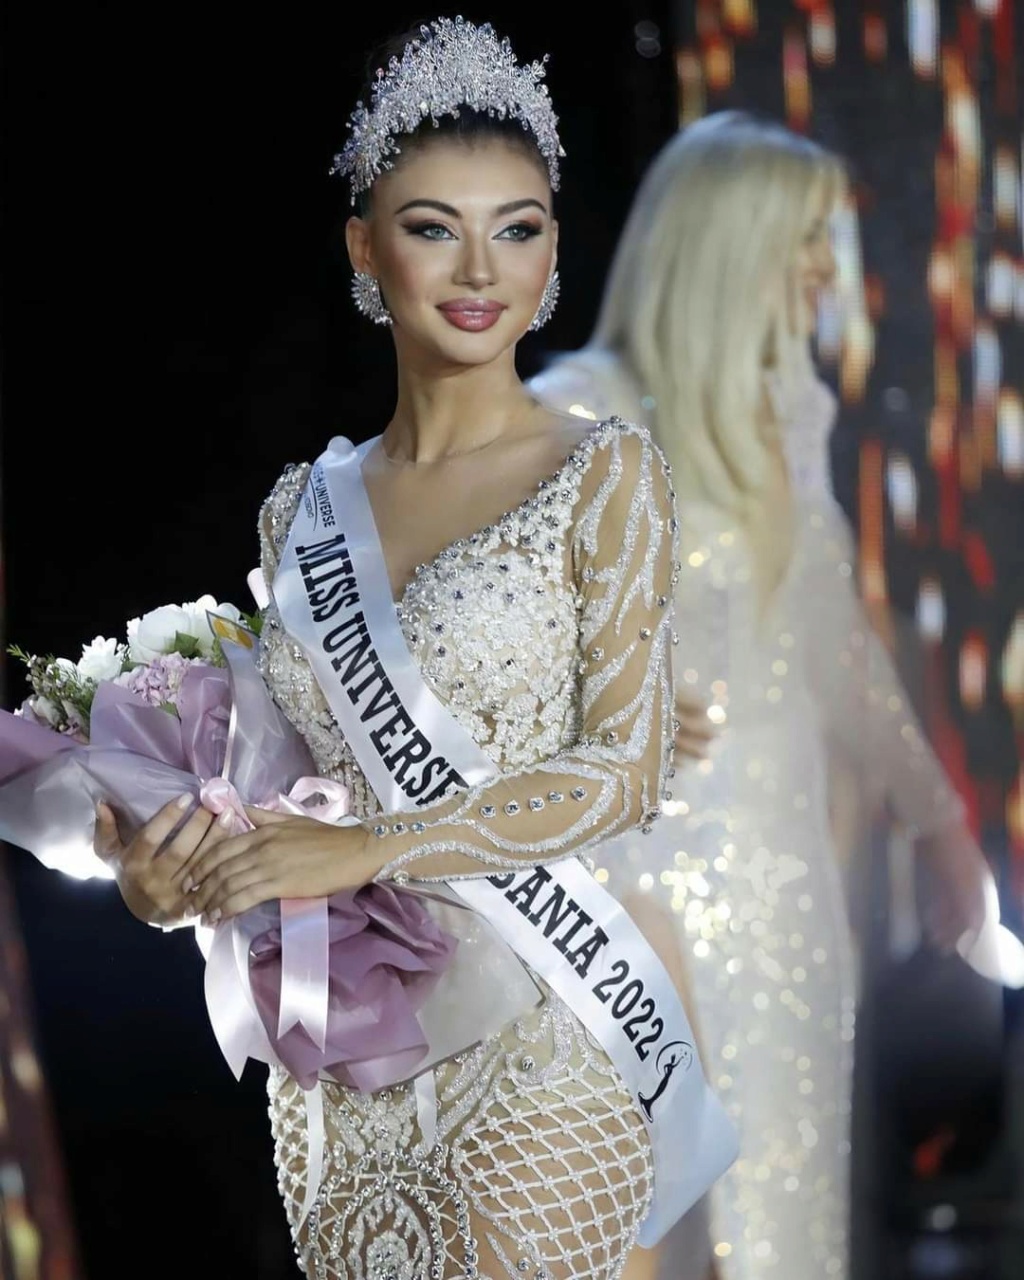 ♔ ROAD TO MISS UNIVERSE 2022 ♔ Winner is USA Fb_22563